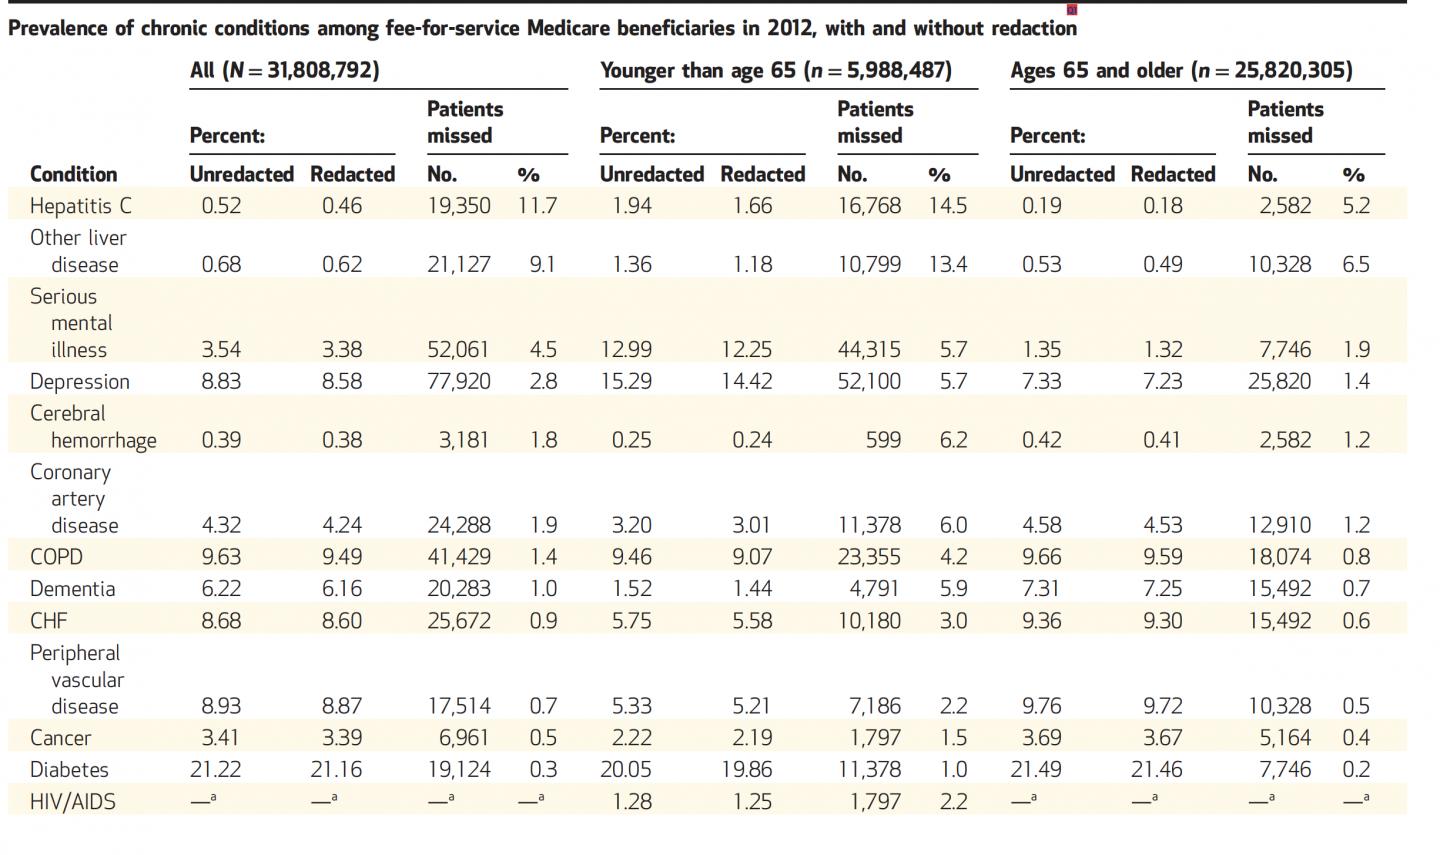 Prevalence of Chronic Conditions among Fee-For-Service Medicare Beneficiaries in 2012, with and with